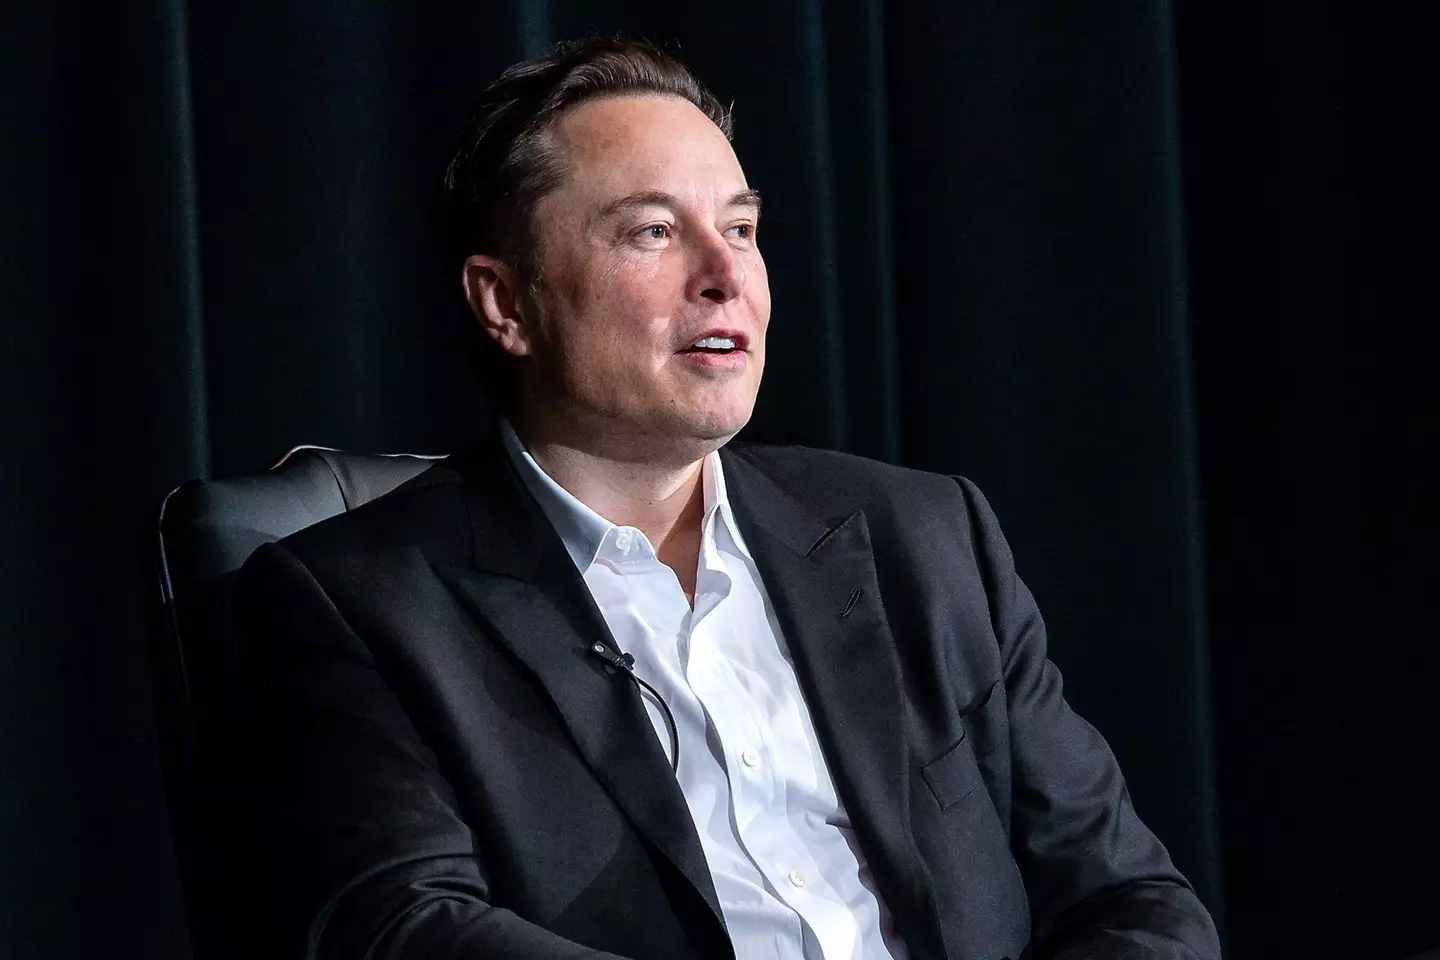 Elon Musk is trying to put Tesla employees's minds at ease.